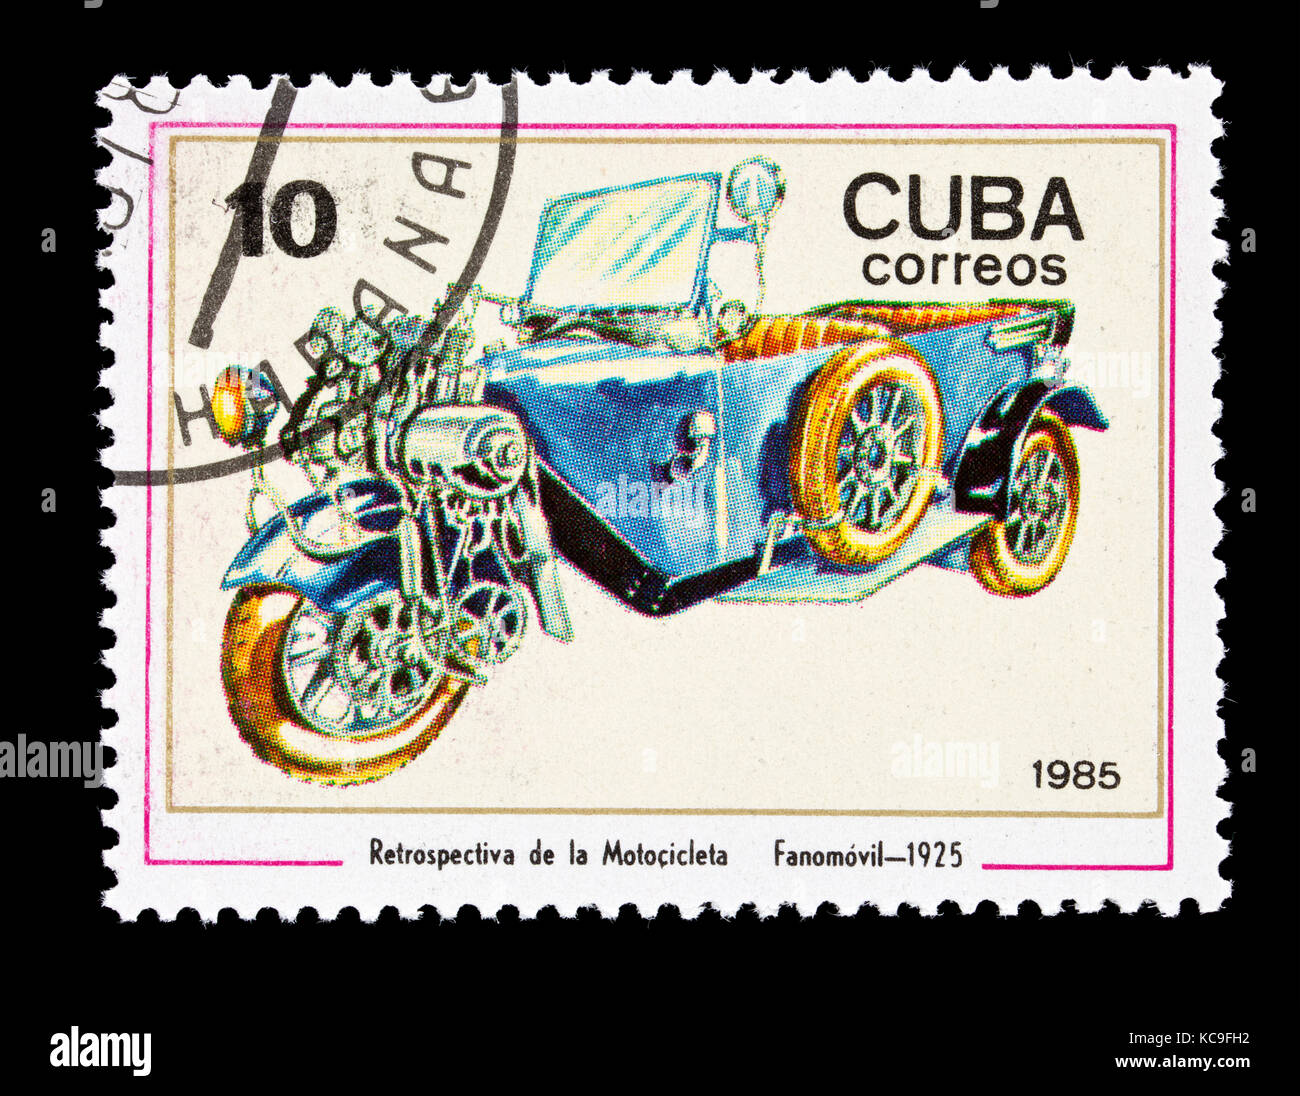 Postage stamp from Cuba depicting an 1925 Fanomobile classic automobile. Stock Photo